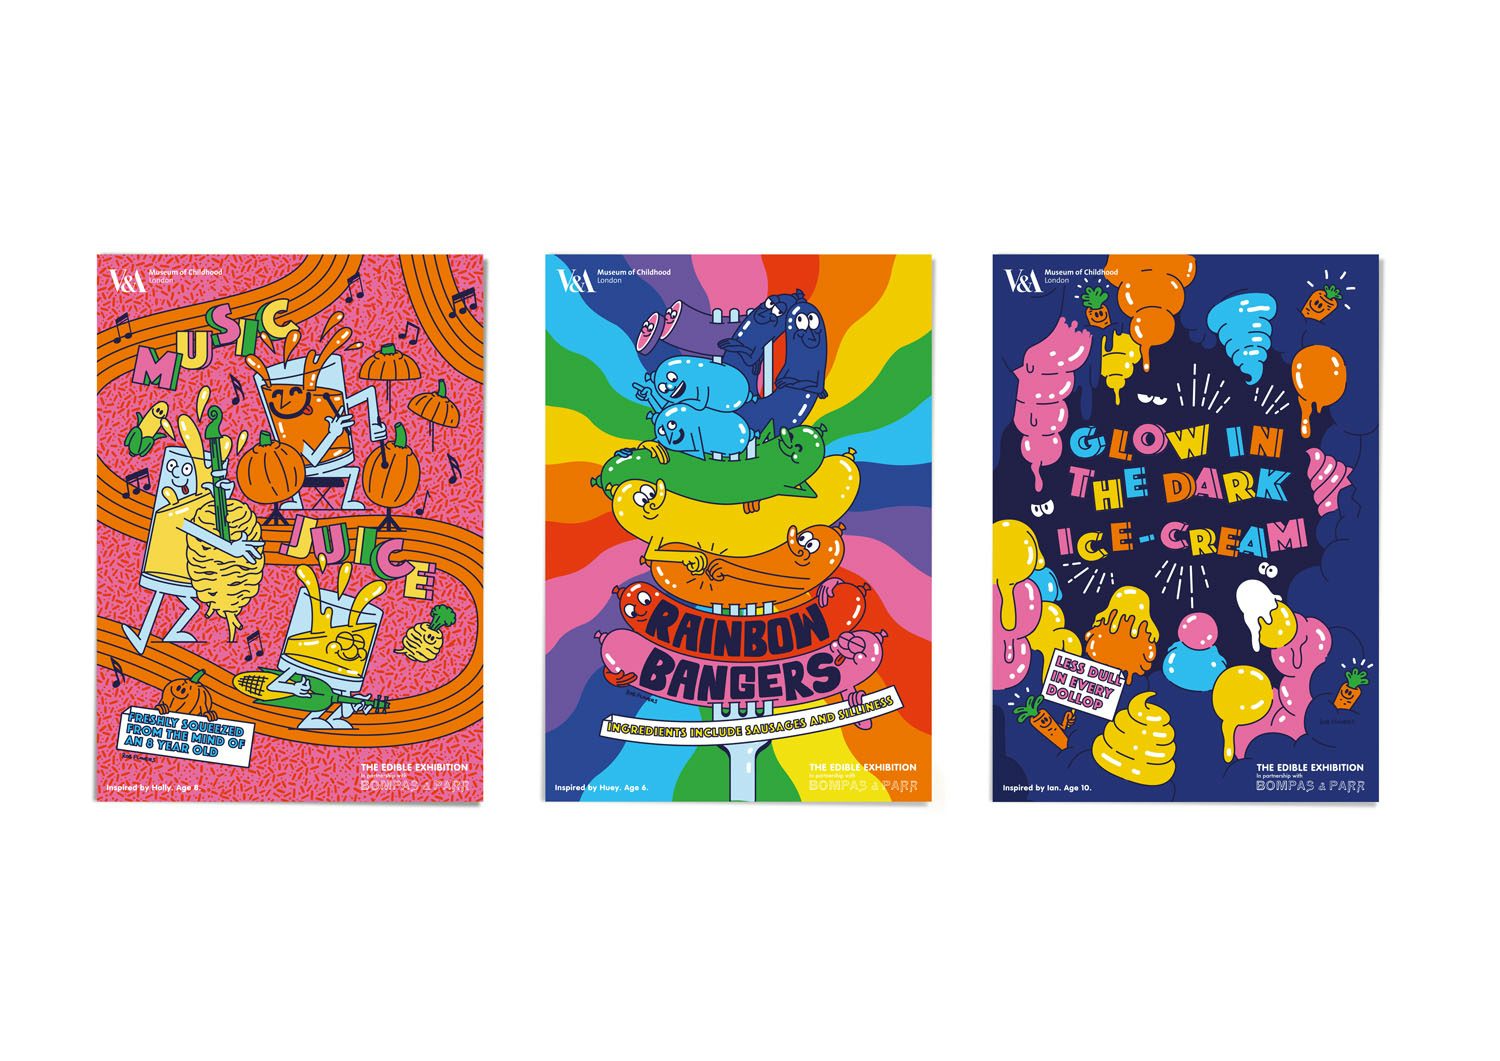 AMV BBDO and Rob Flowers' edible posters for the Museum of Childhood